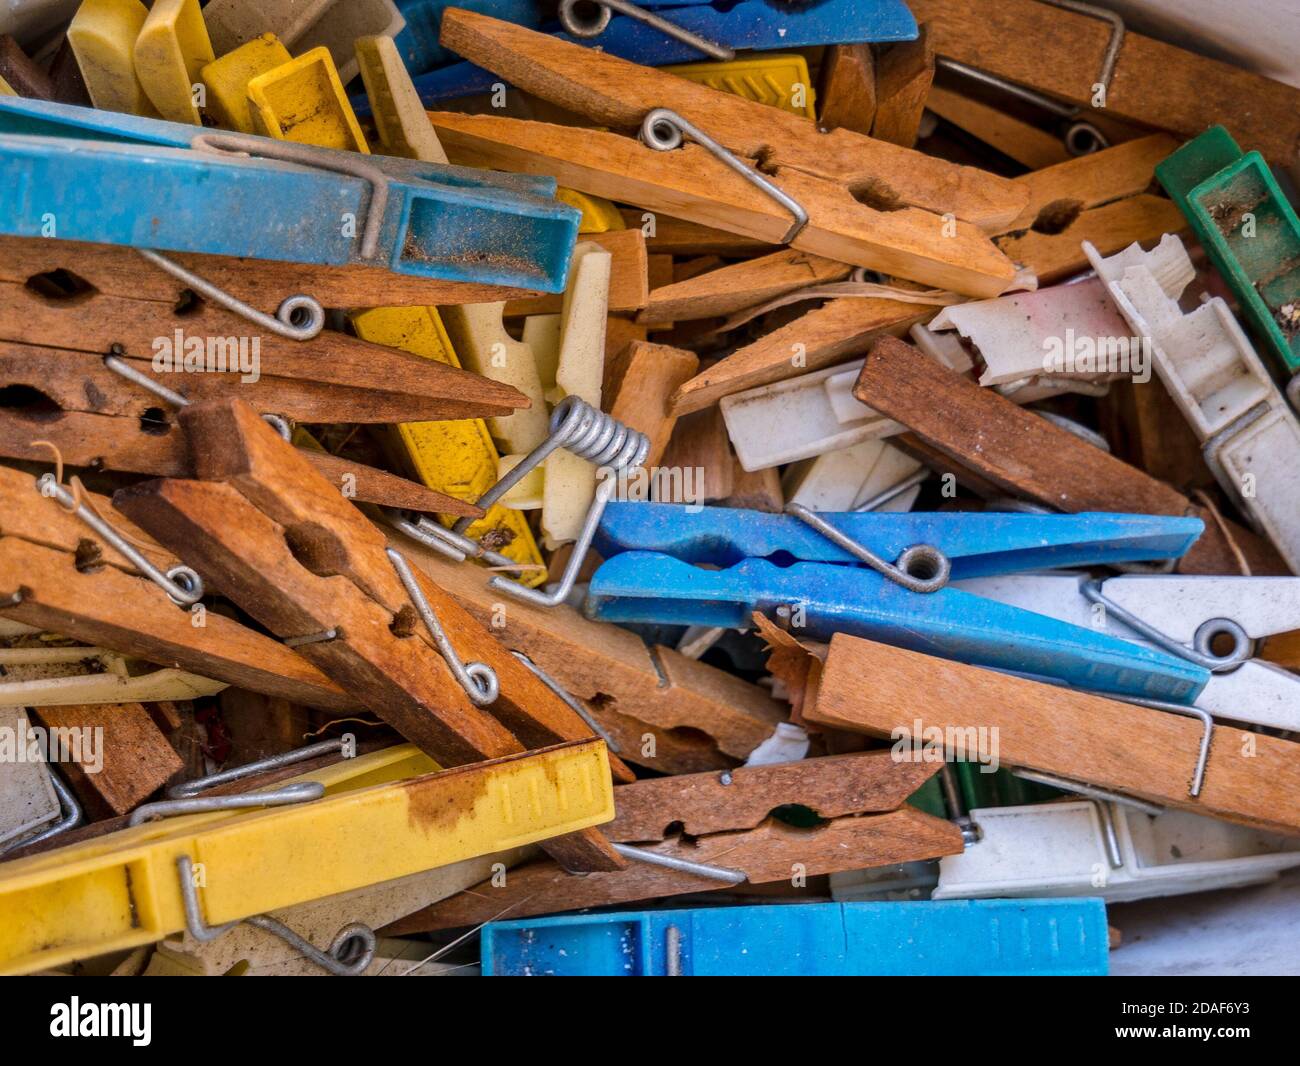 Pile of old plastic and wooden clothes pegs Stock Photo